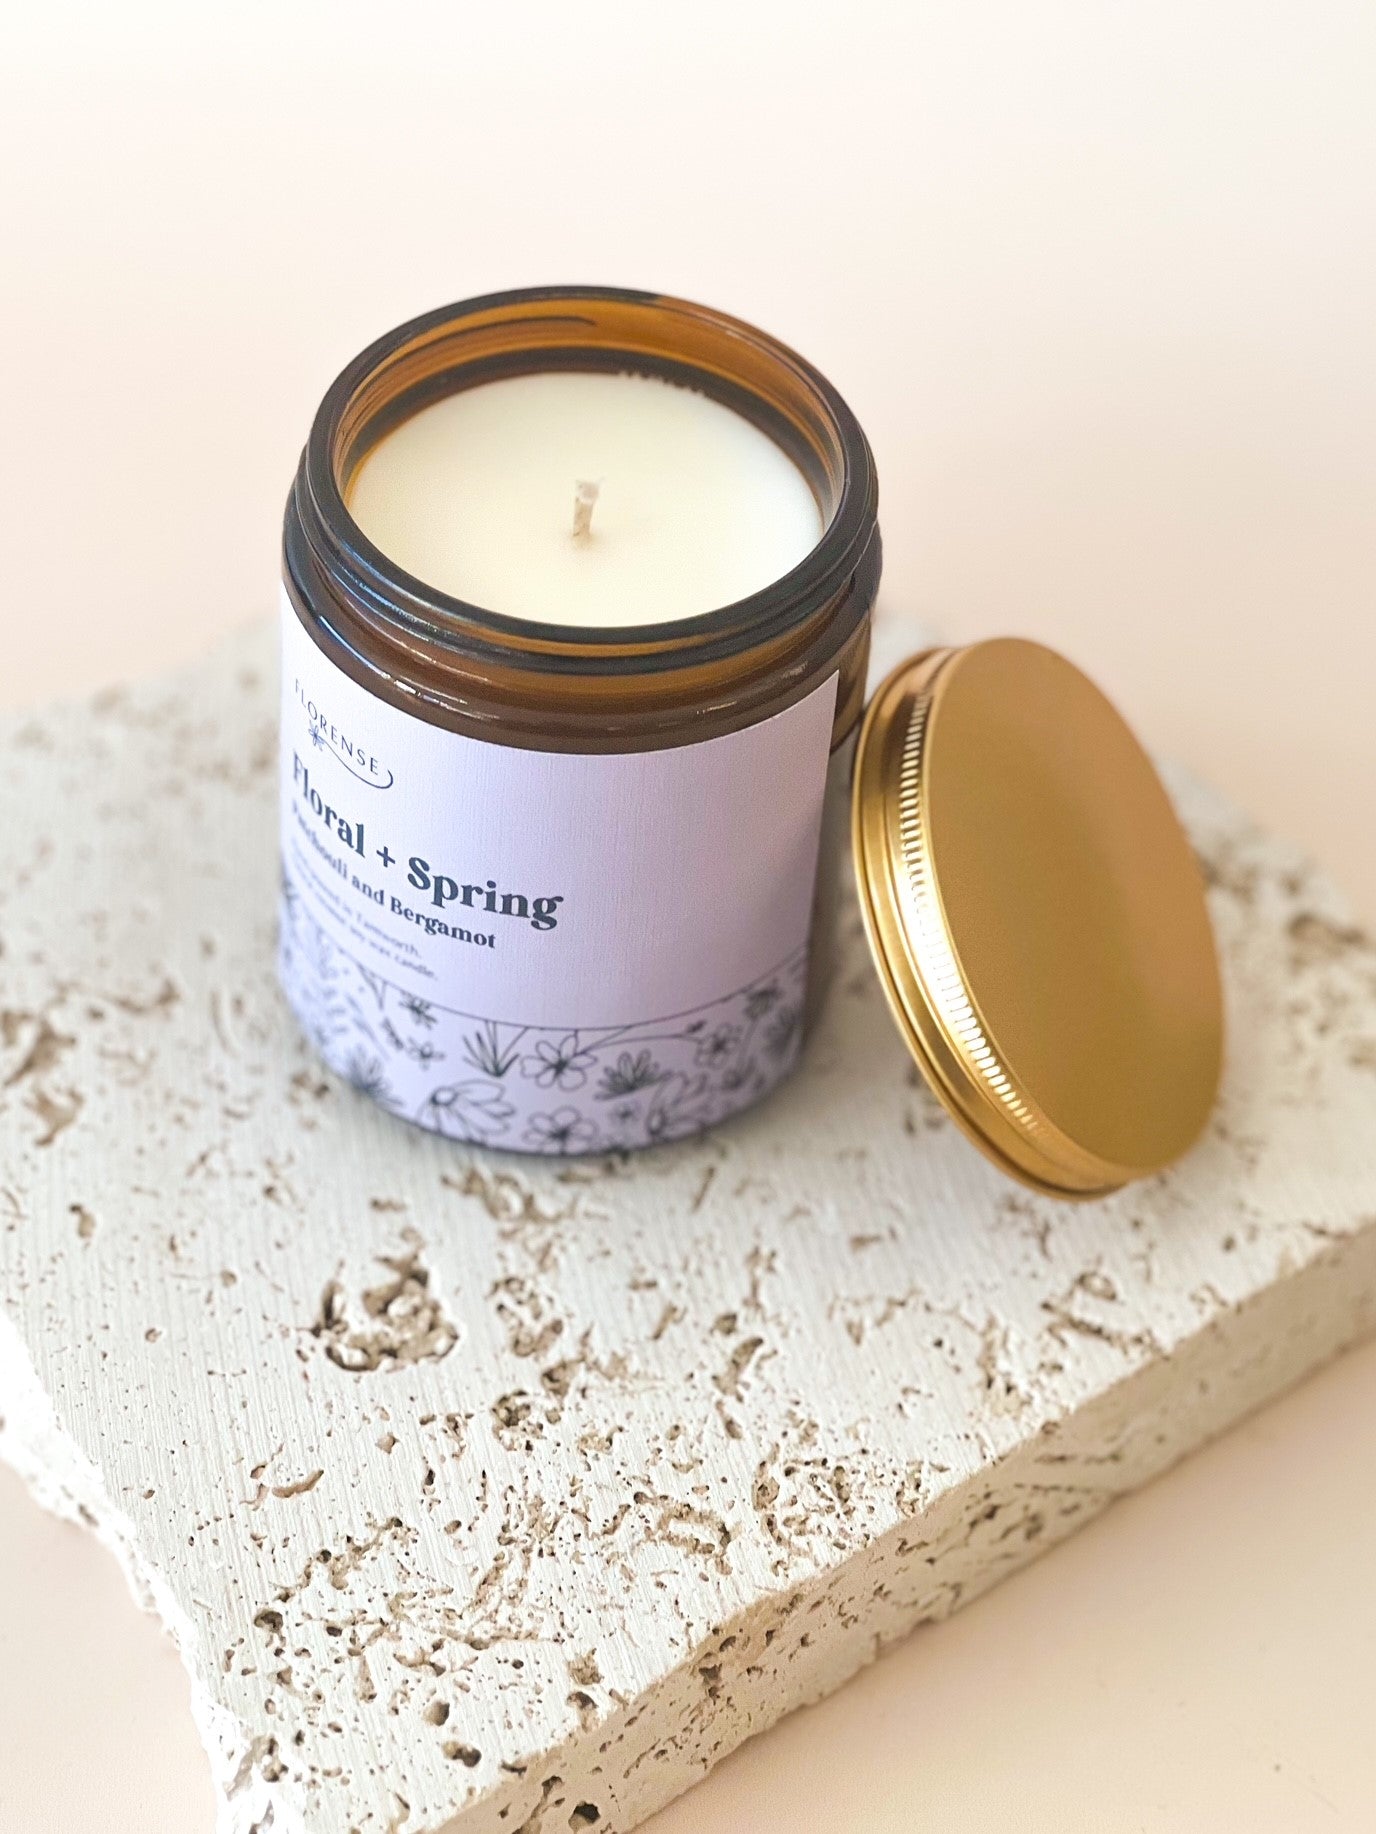 Amber Candle | Floral + Spring (Patchouli and Bergamot)